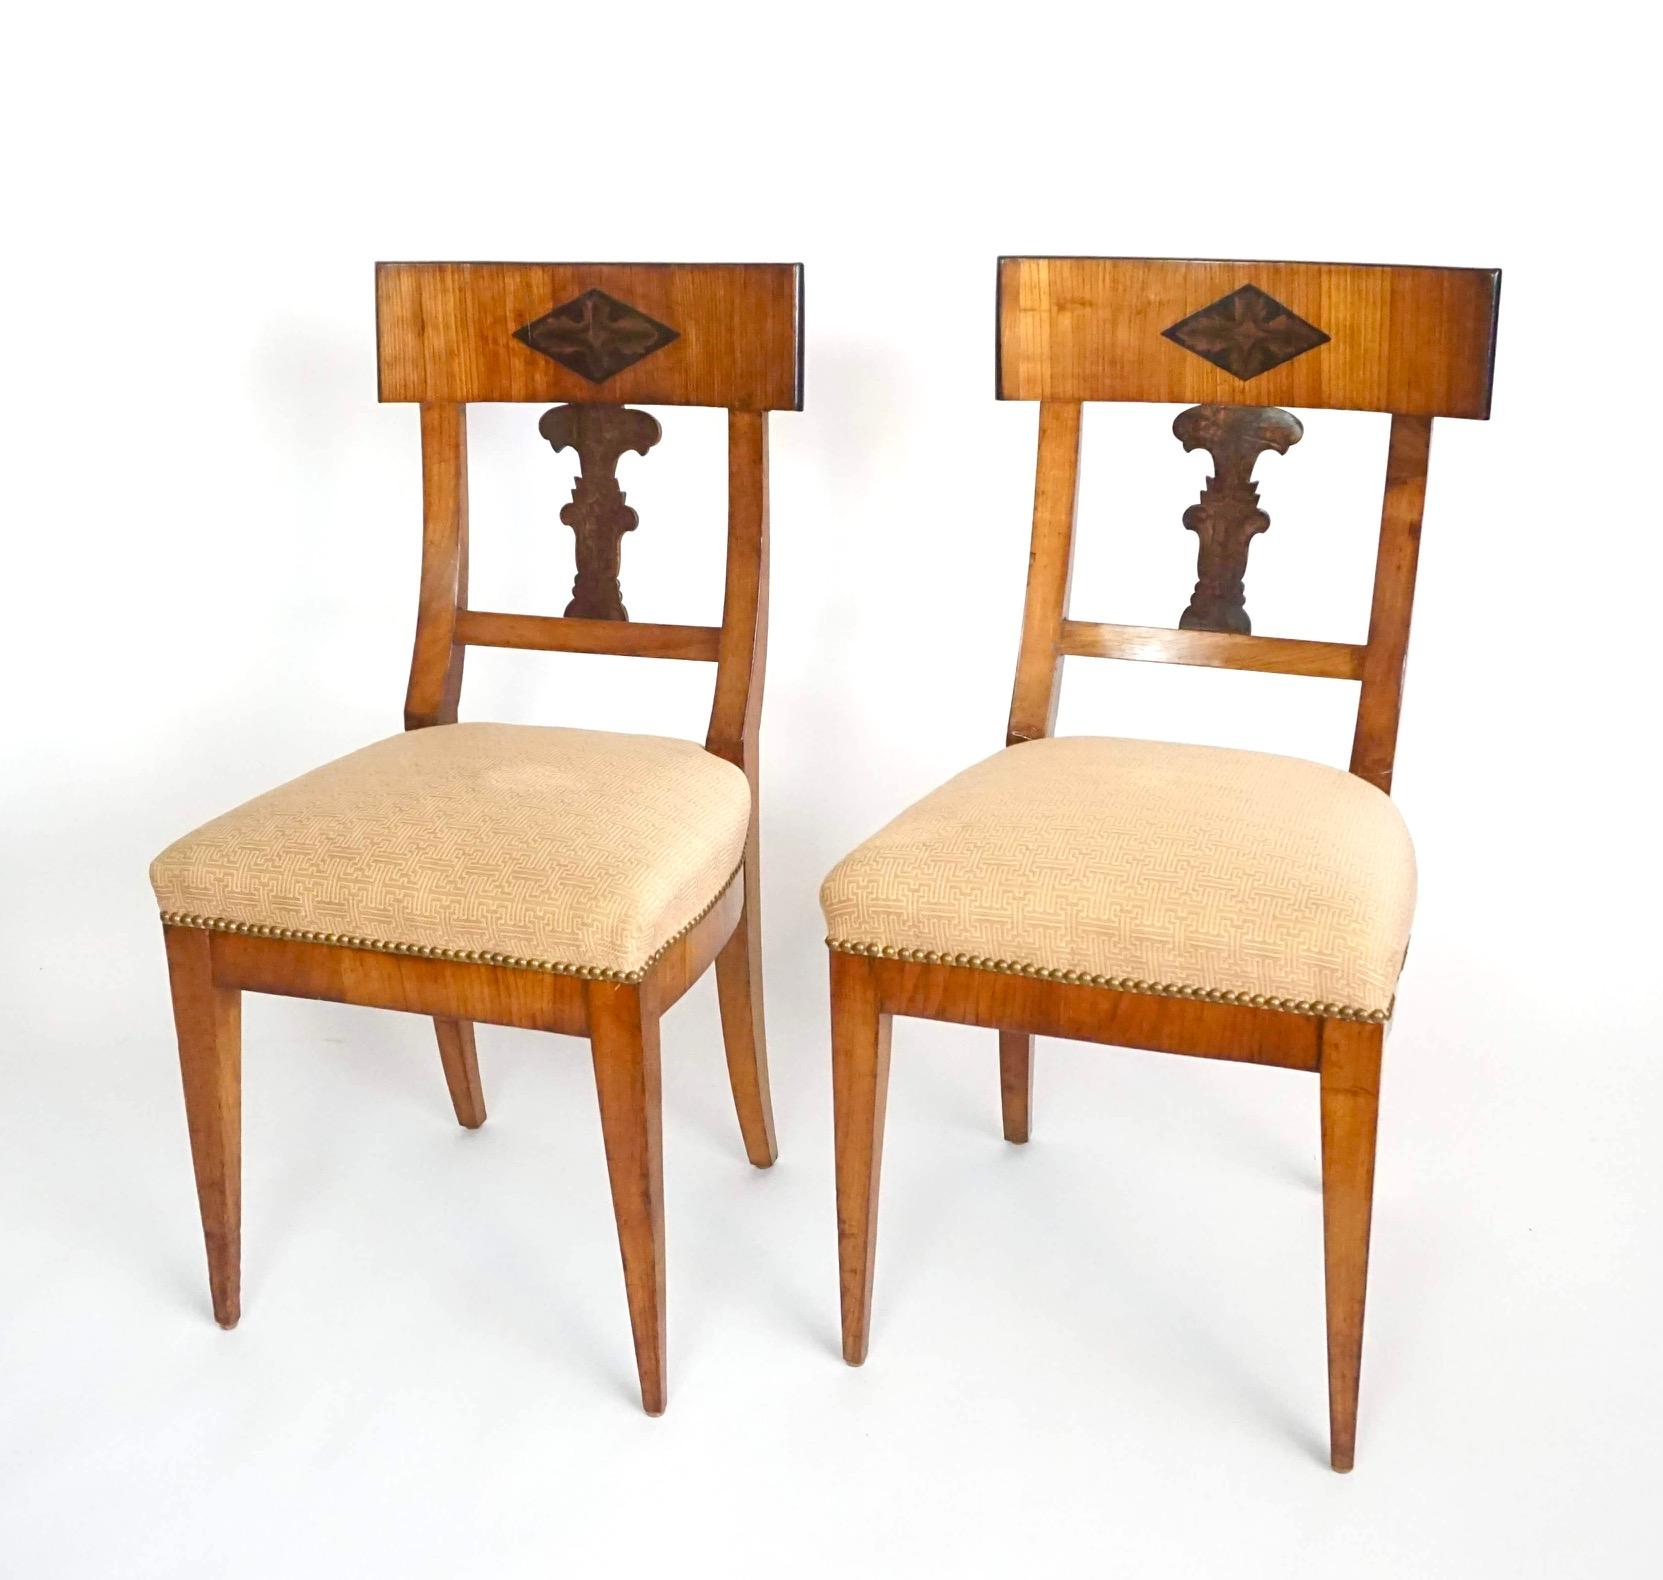 An attractive pair of circa 1820 Bavarian Biedermeier side chairs of large scale having walnut frames, the curved crestrails with center penwork acanthus lozenges and shaped backsplats with penwork foliate designs above 